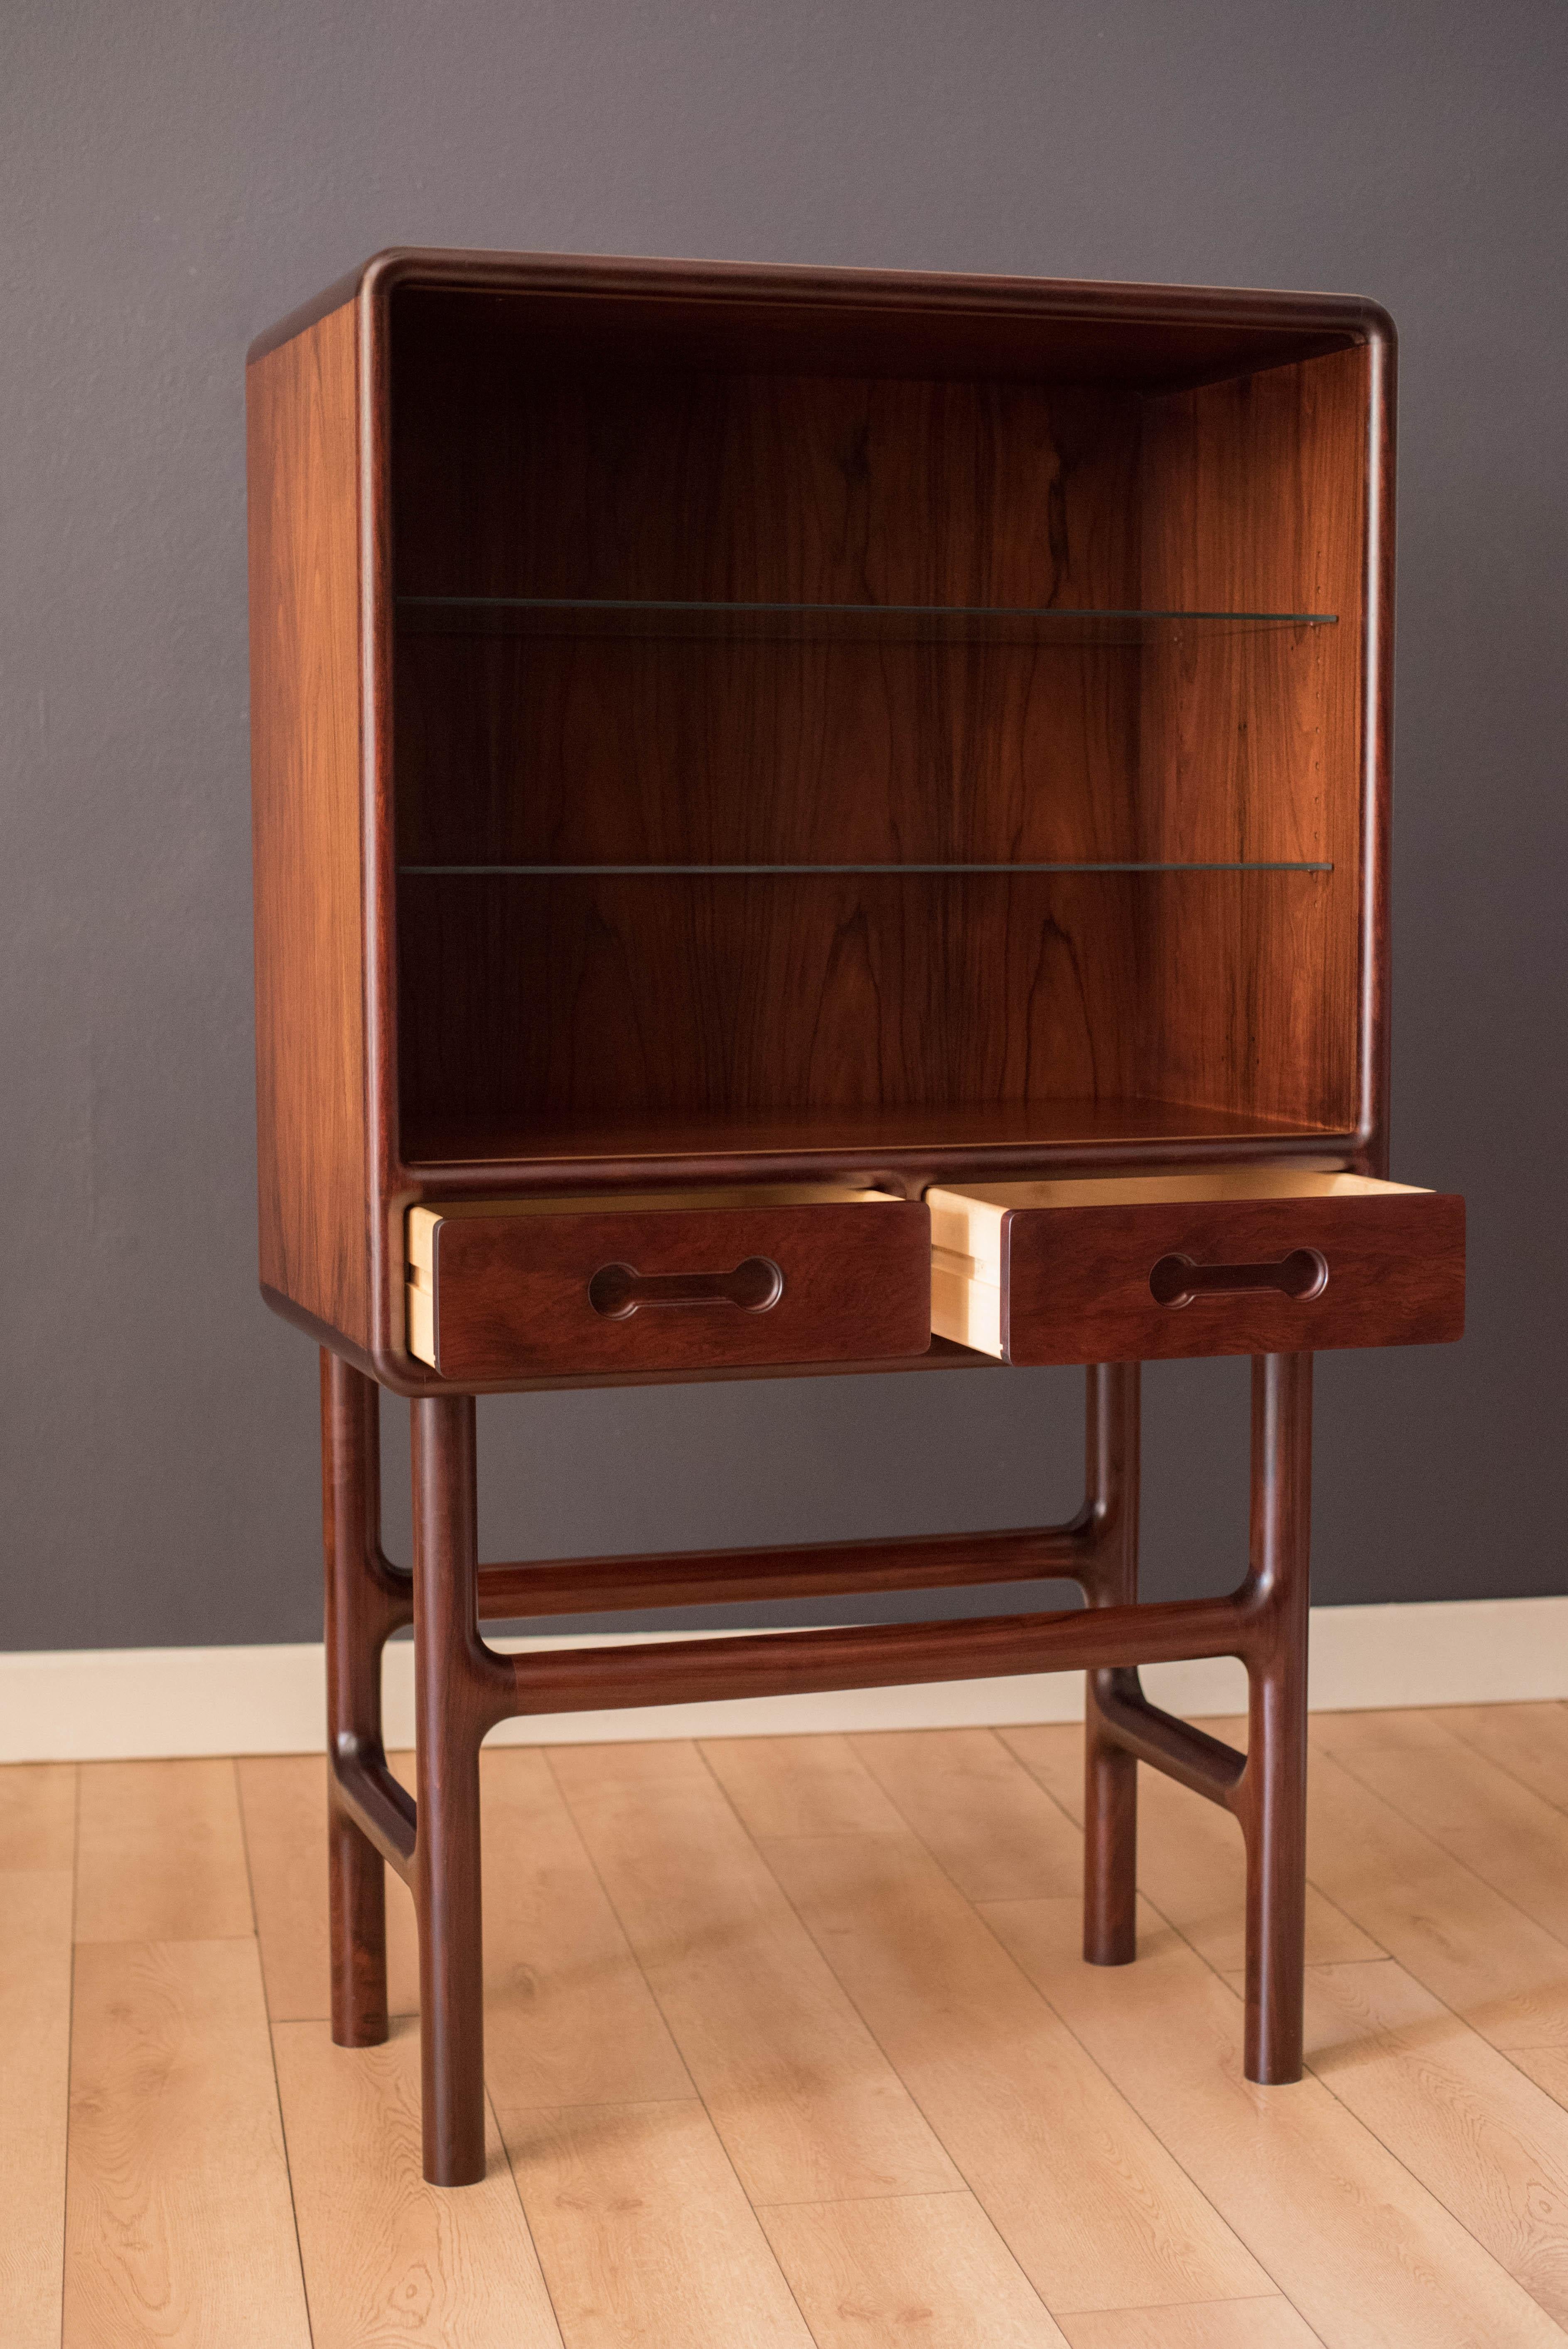 Danish Modern Rosewood Cocktail Dry Bar Storage Cabinet In Good Condition For Sale In San Jose, CA